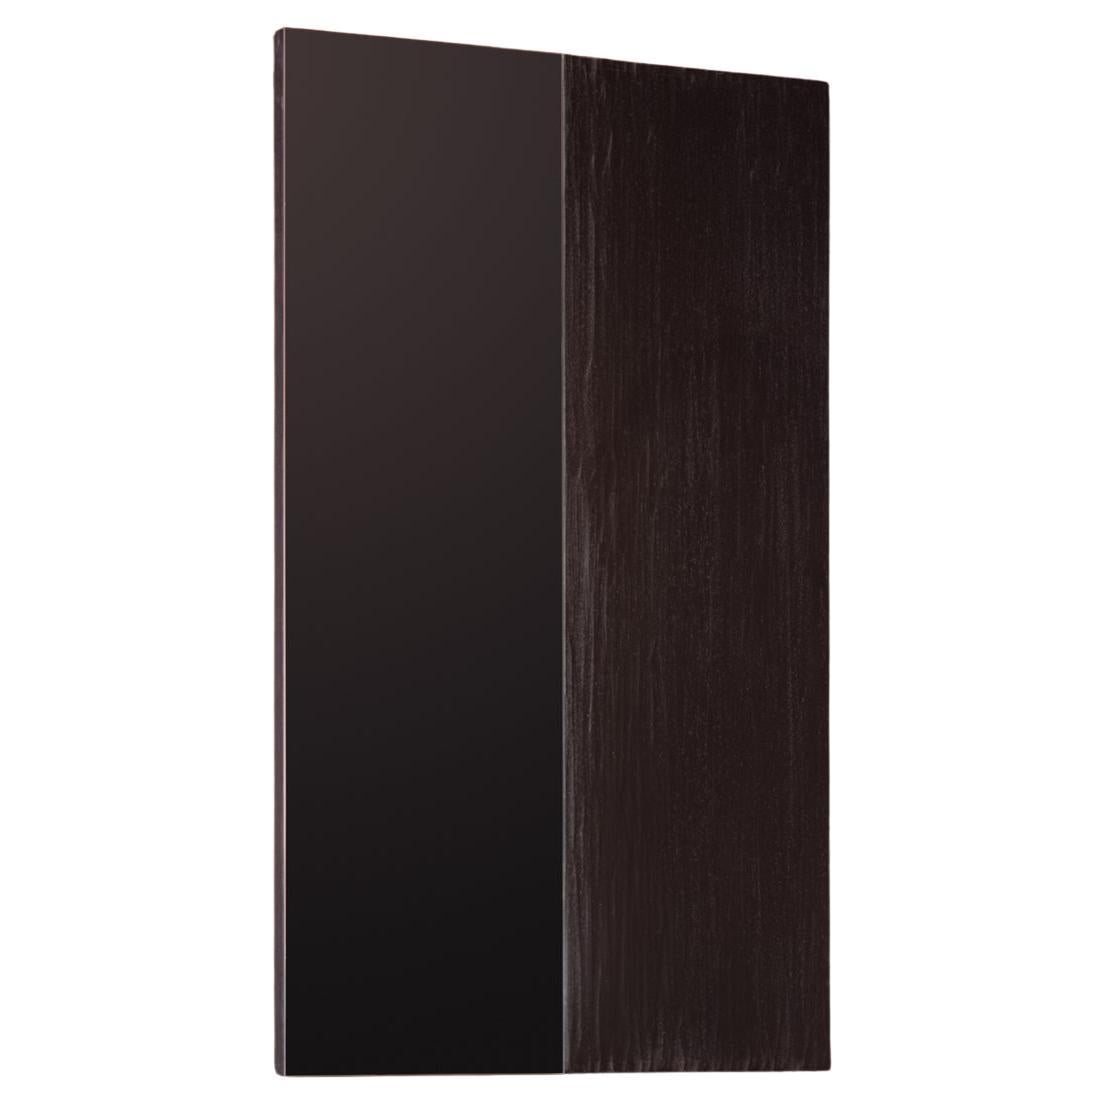 Medieval Modern Wall Mirror with Carved & Blackened Oak Panel by Rooms Studio